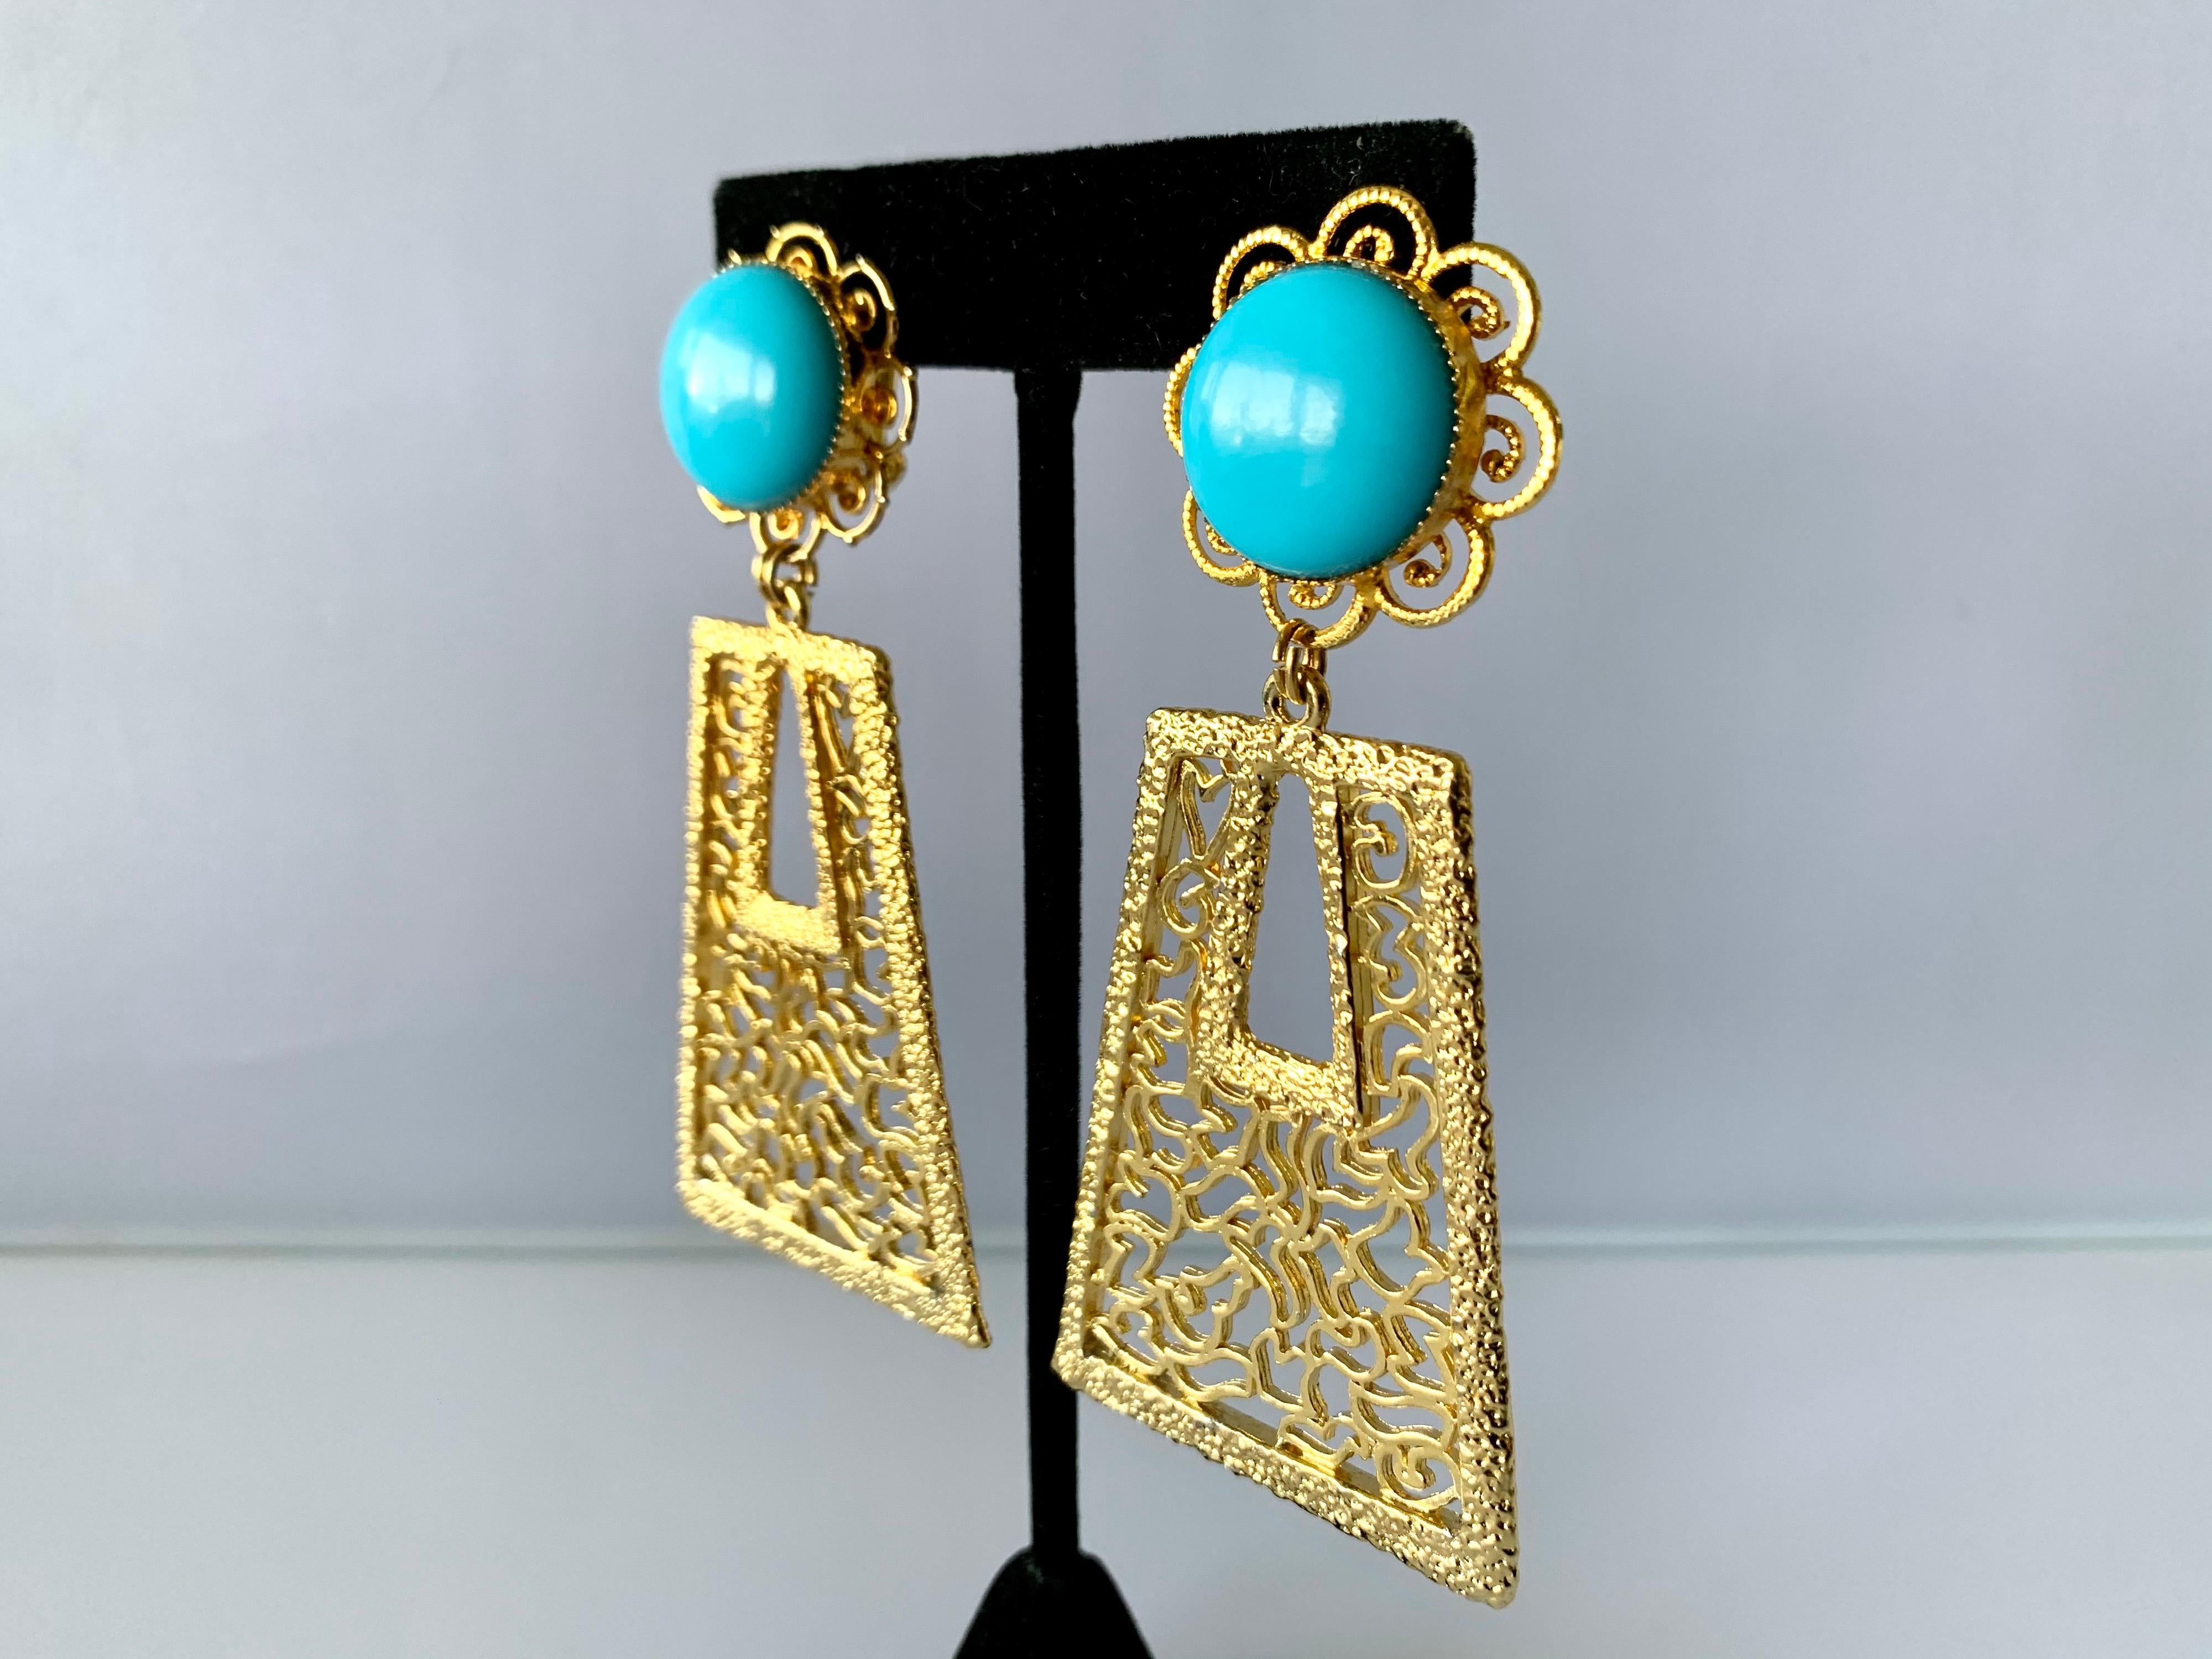 Vintage oversized 1960's geometric statement clip-on earrings comprised out of gold-tone metal adorned by large faux turquoise cabochons - designed by William de Lillo.